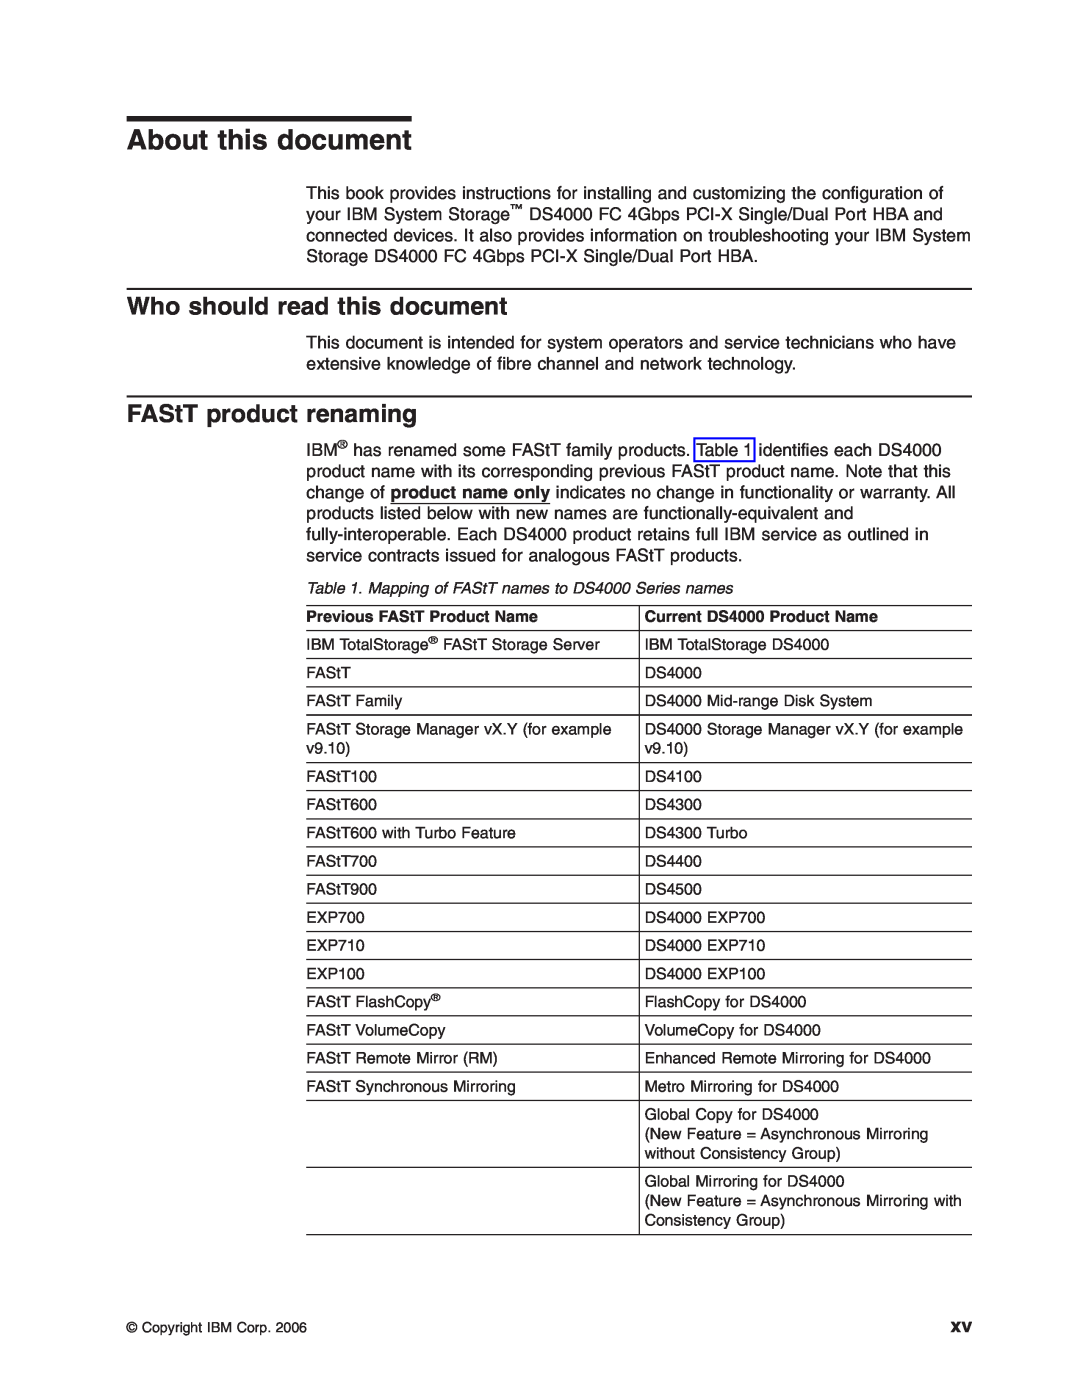 IBM DS4000 FC manual About this document, Who should read this document, FAStT product renaming 